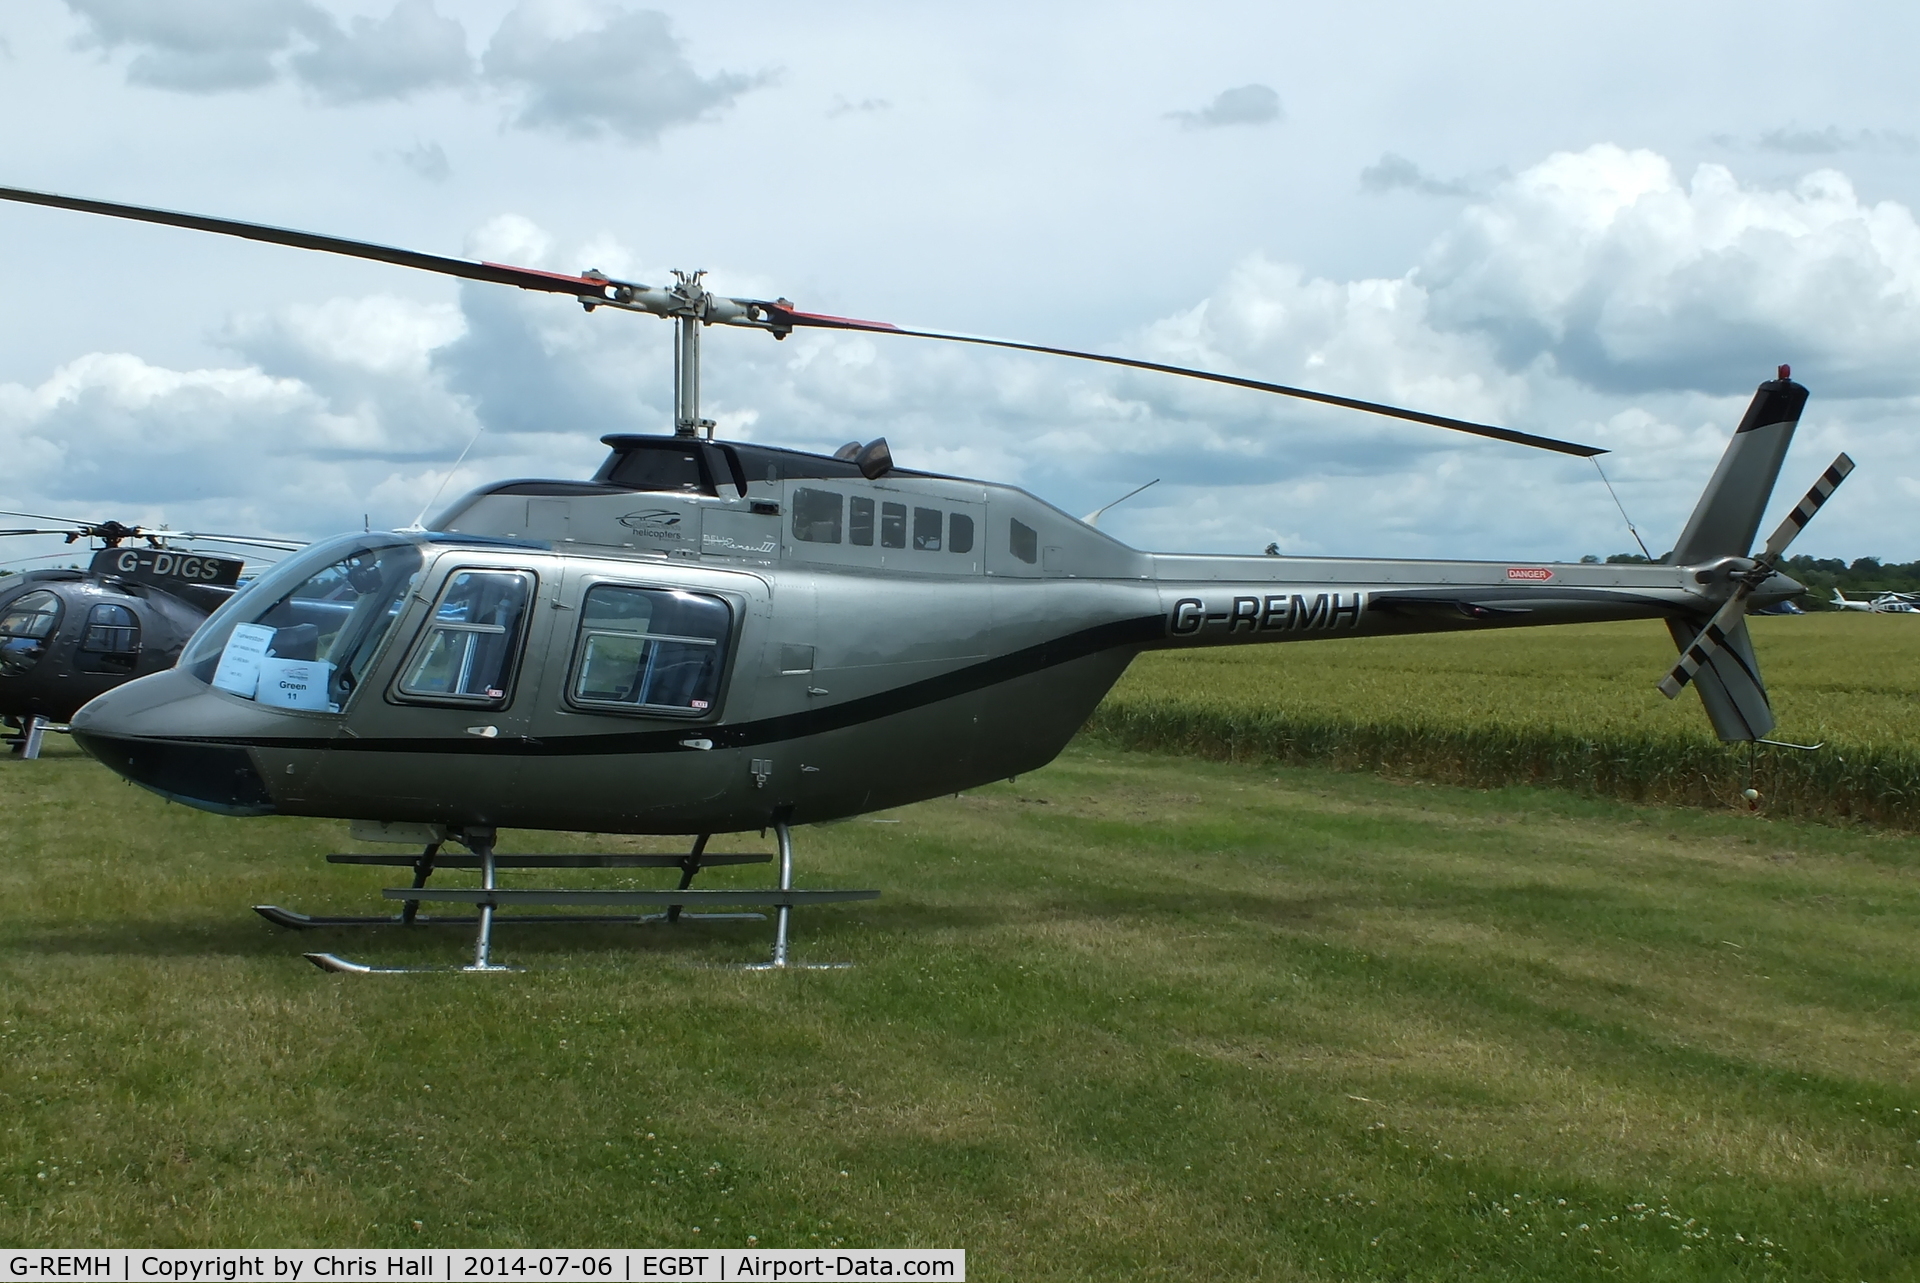 G-REMH, 2007 Bell 206B JetRanger III C/N 4626, ferrying race fans to the British F1 Grand Prix at Silverstone